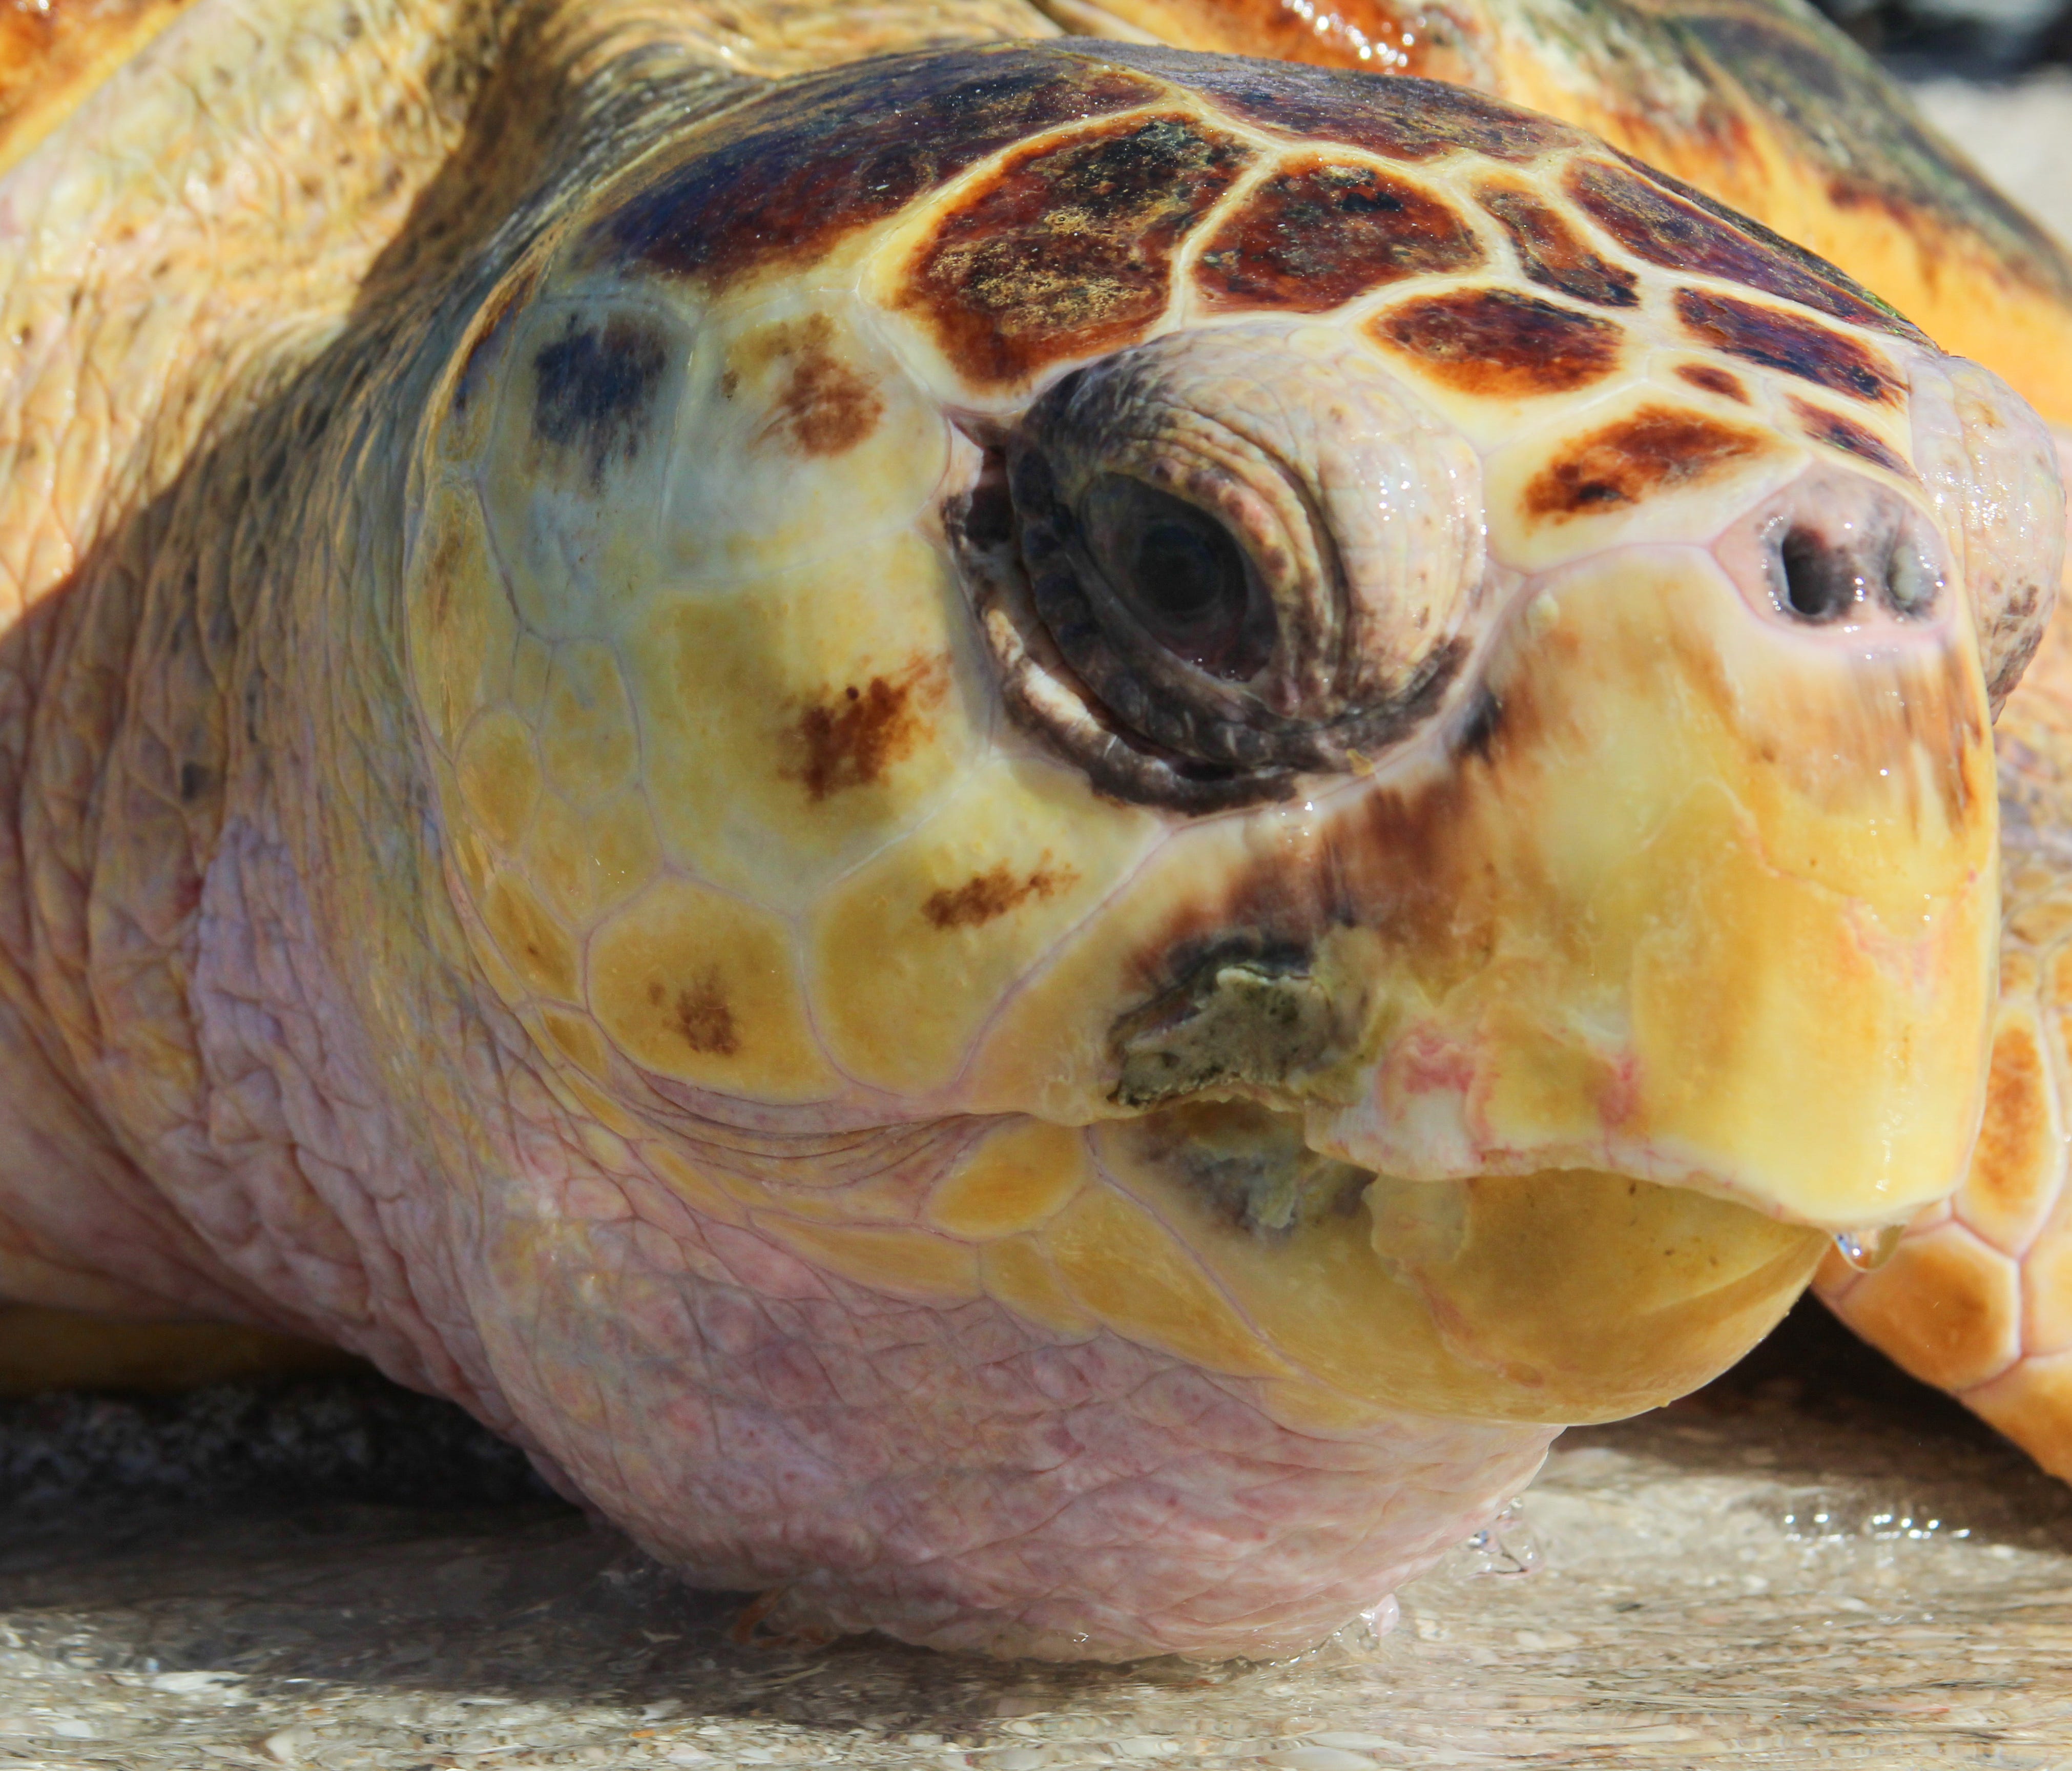 An adult loggerhead that was found stranded in Boca Grand, Fla., is released back into the wild after rehabilitation at Mote Marine Laboratory's Sea Turtle Rehabilitation Hospital.